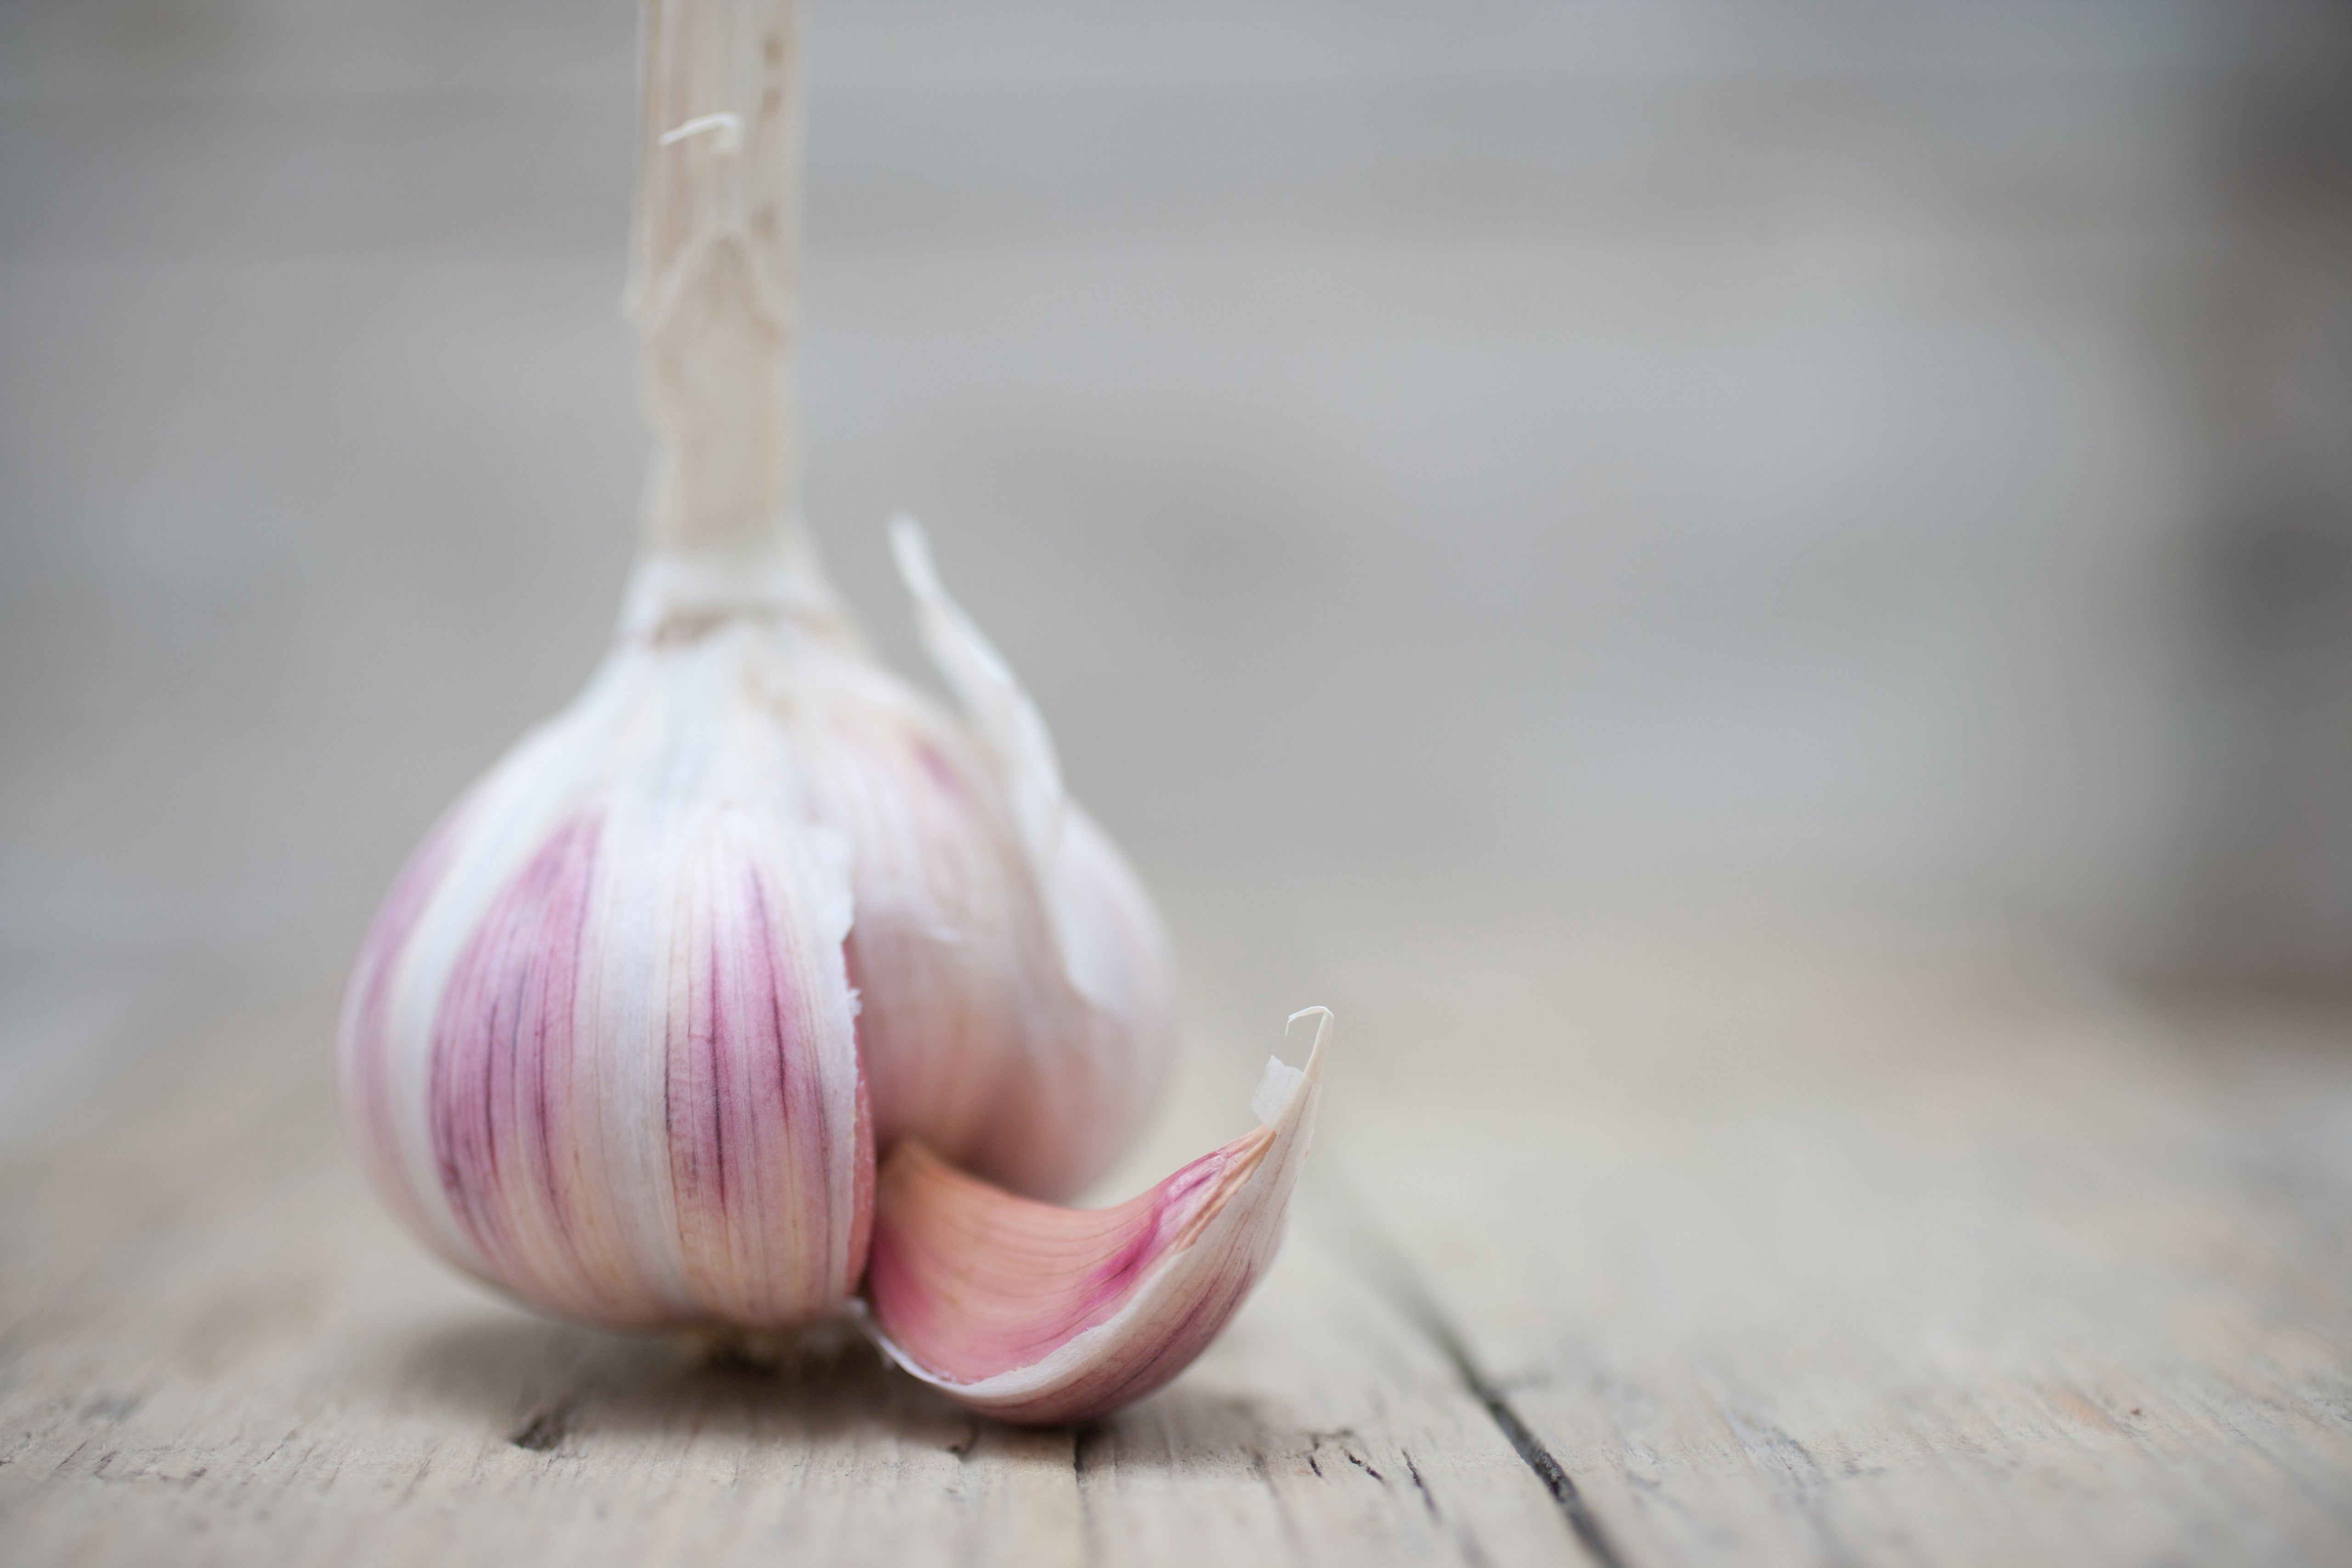 Why Putting Garlic in Your Vagina to Treat a Yeast Infection Isn't a Good Idea
